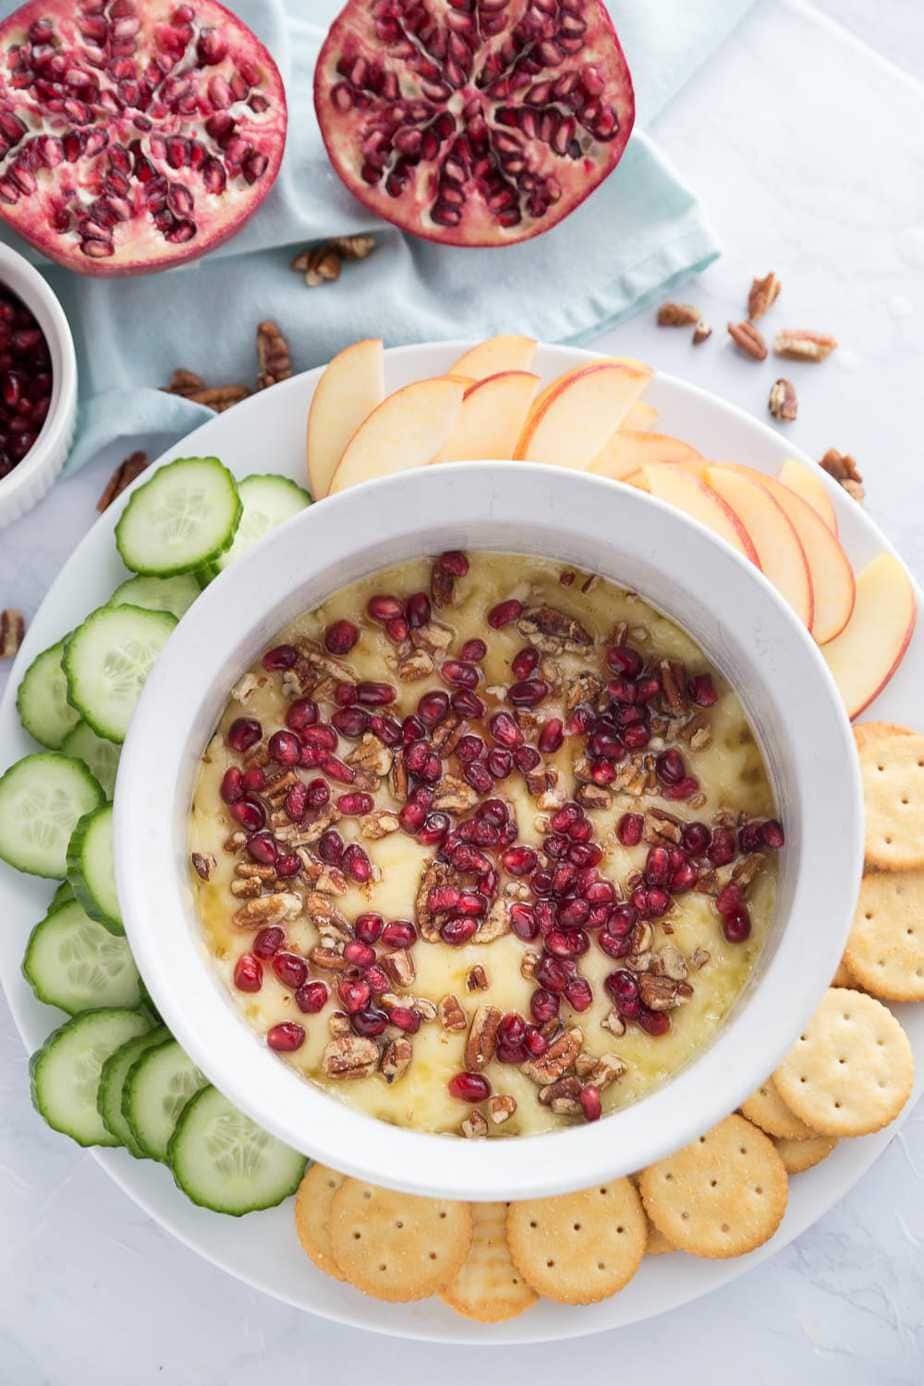 Overhead photo of baked brie appetizer topped with nuts and pomegranate seeds, in a white casserole dish. The casserole dish is sitting on a round white plate and cucumber slices, crackers, and apple slices surround the casserole dish. In the background is a pomegranate cut in half on a white napkin.